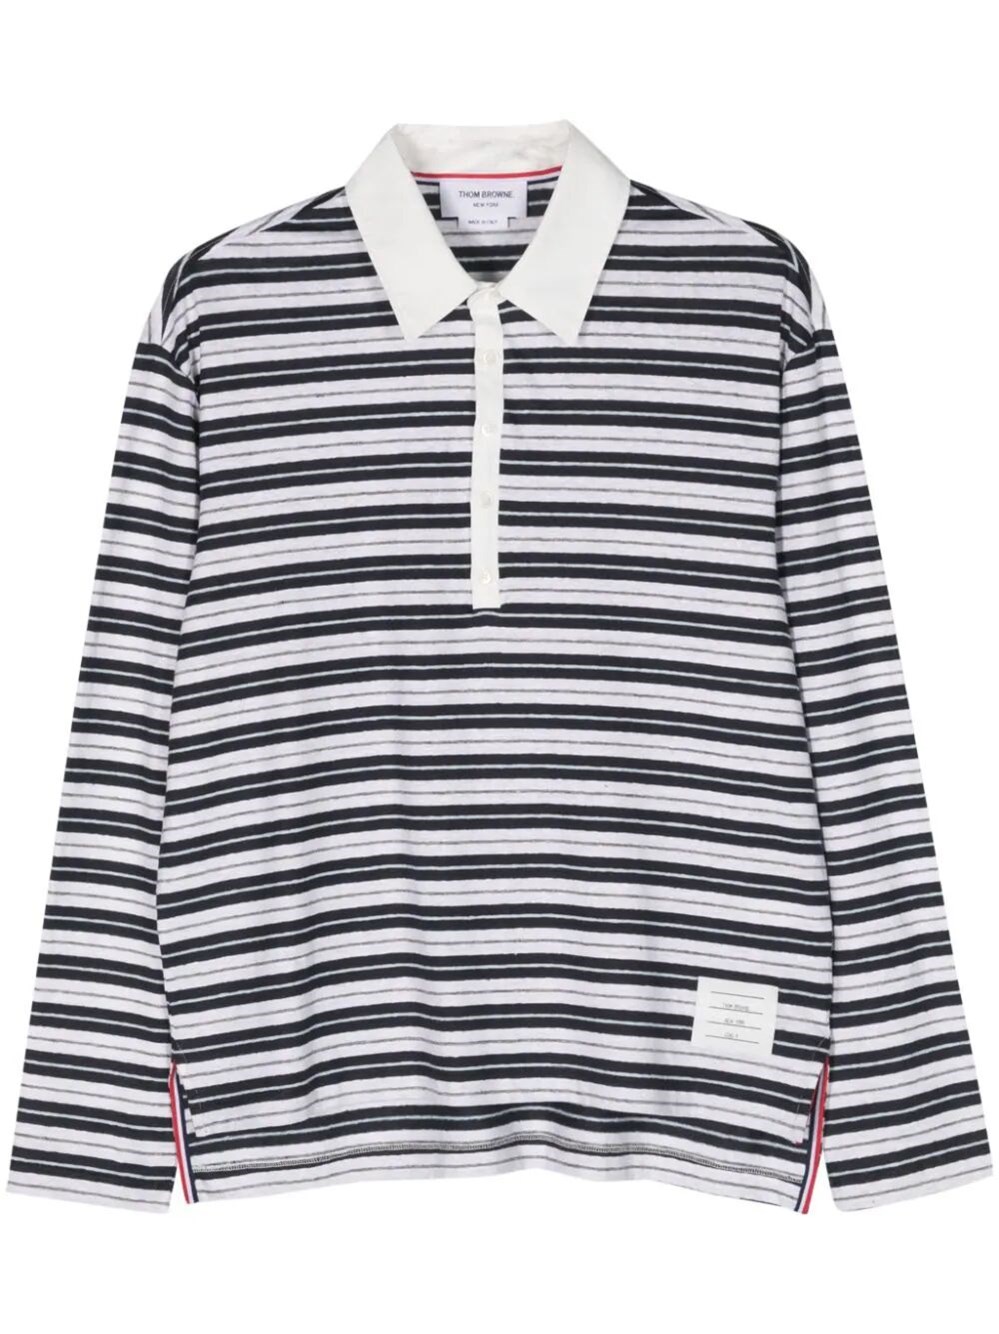 Thom Browne Striped Polo Shirt In Blue